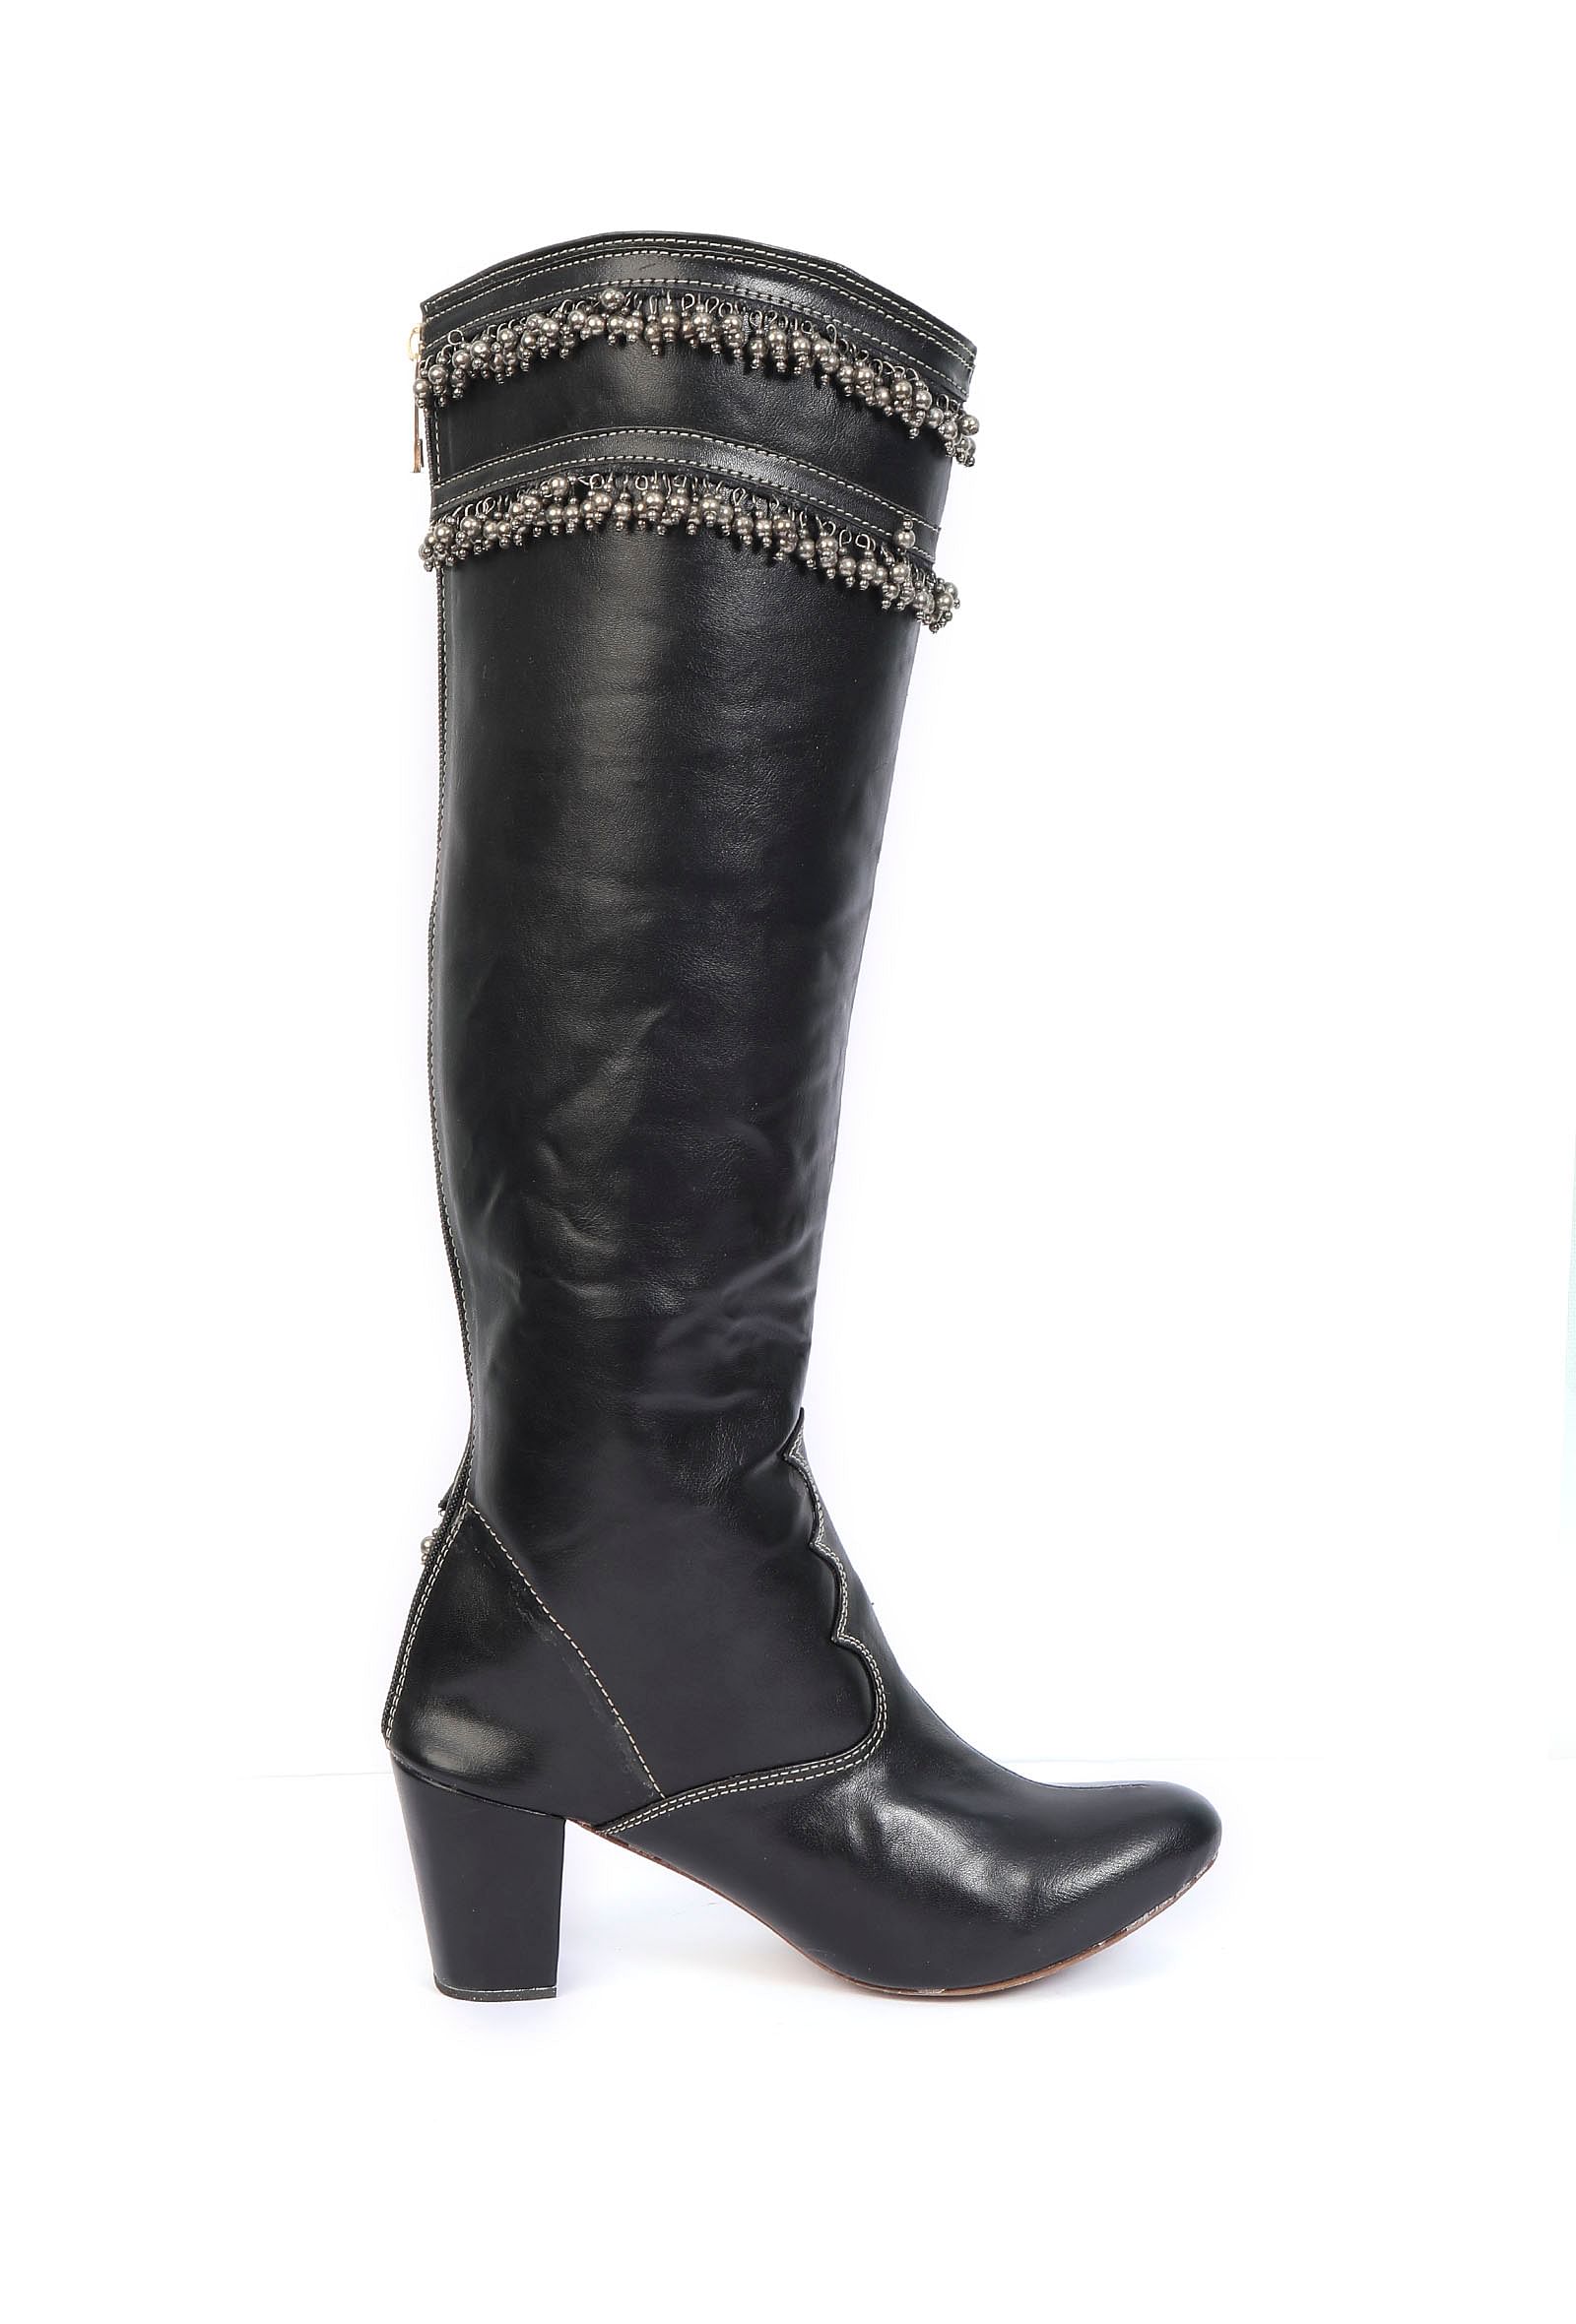 Black Ghungroo Cruelty Free Leather Long Boots